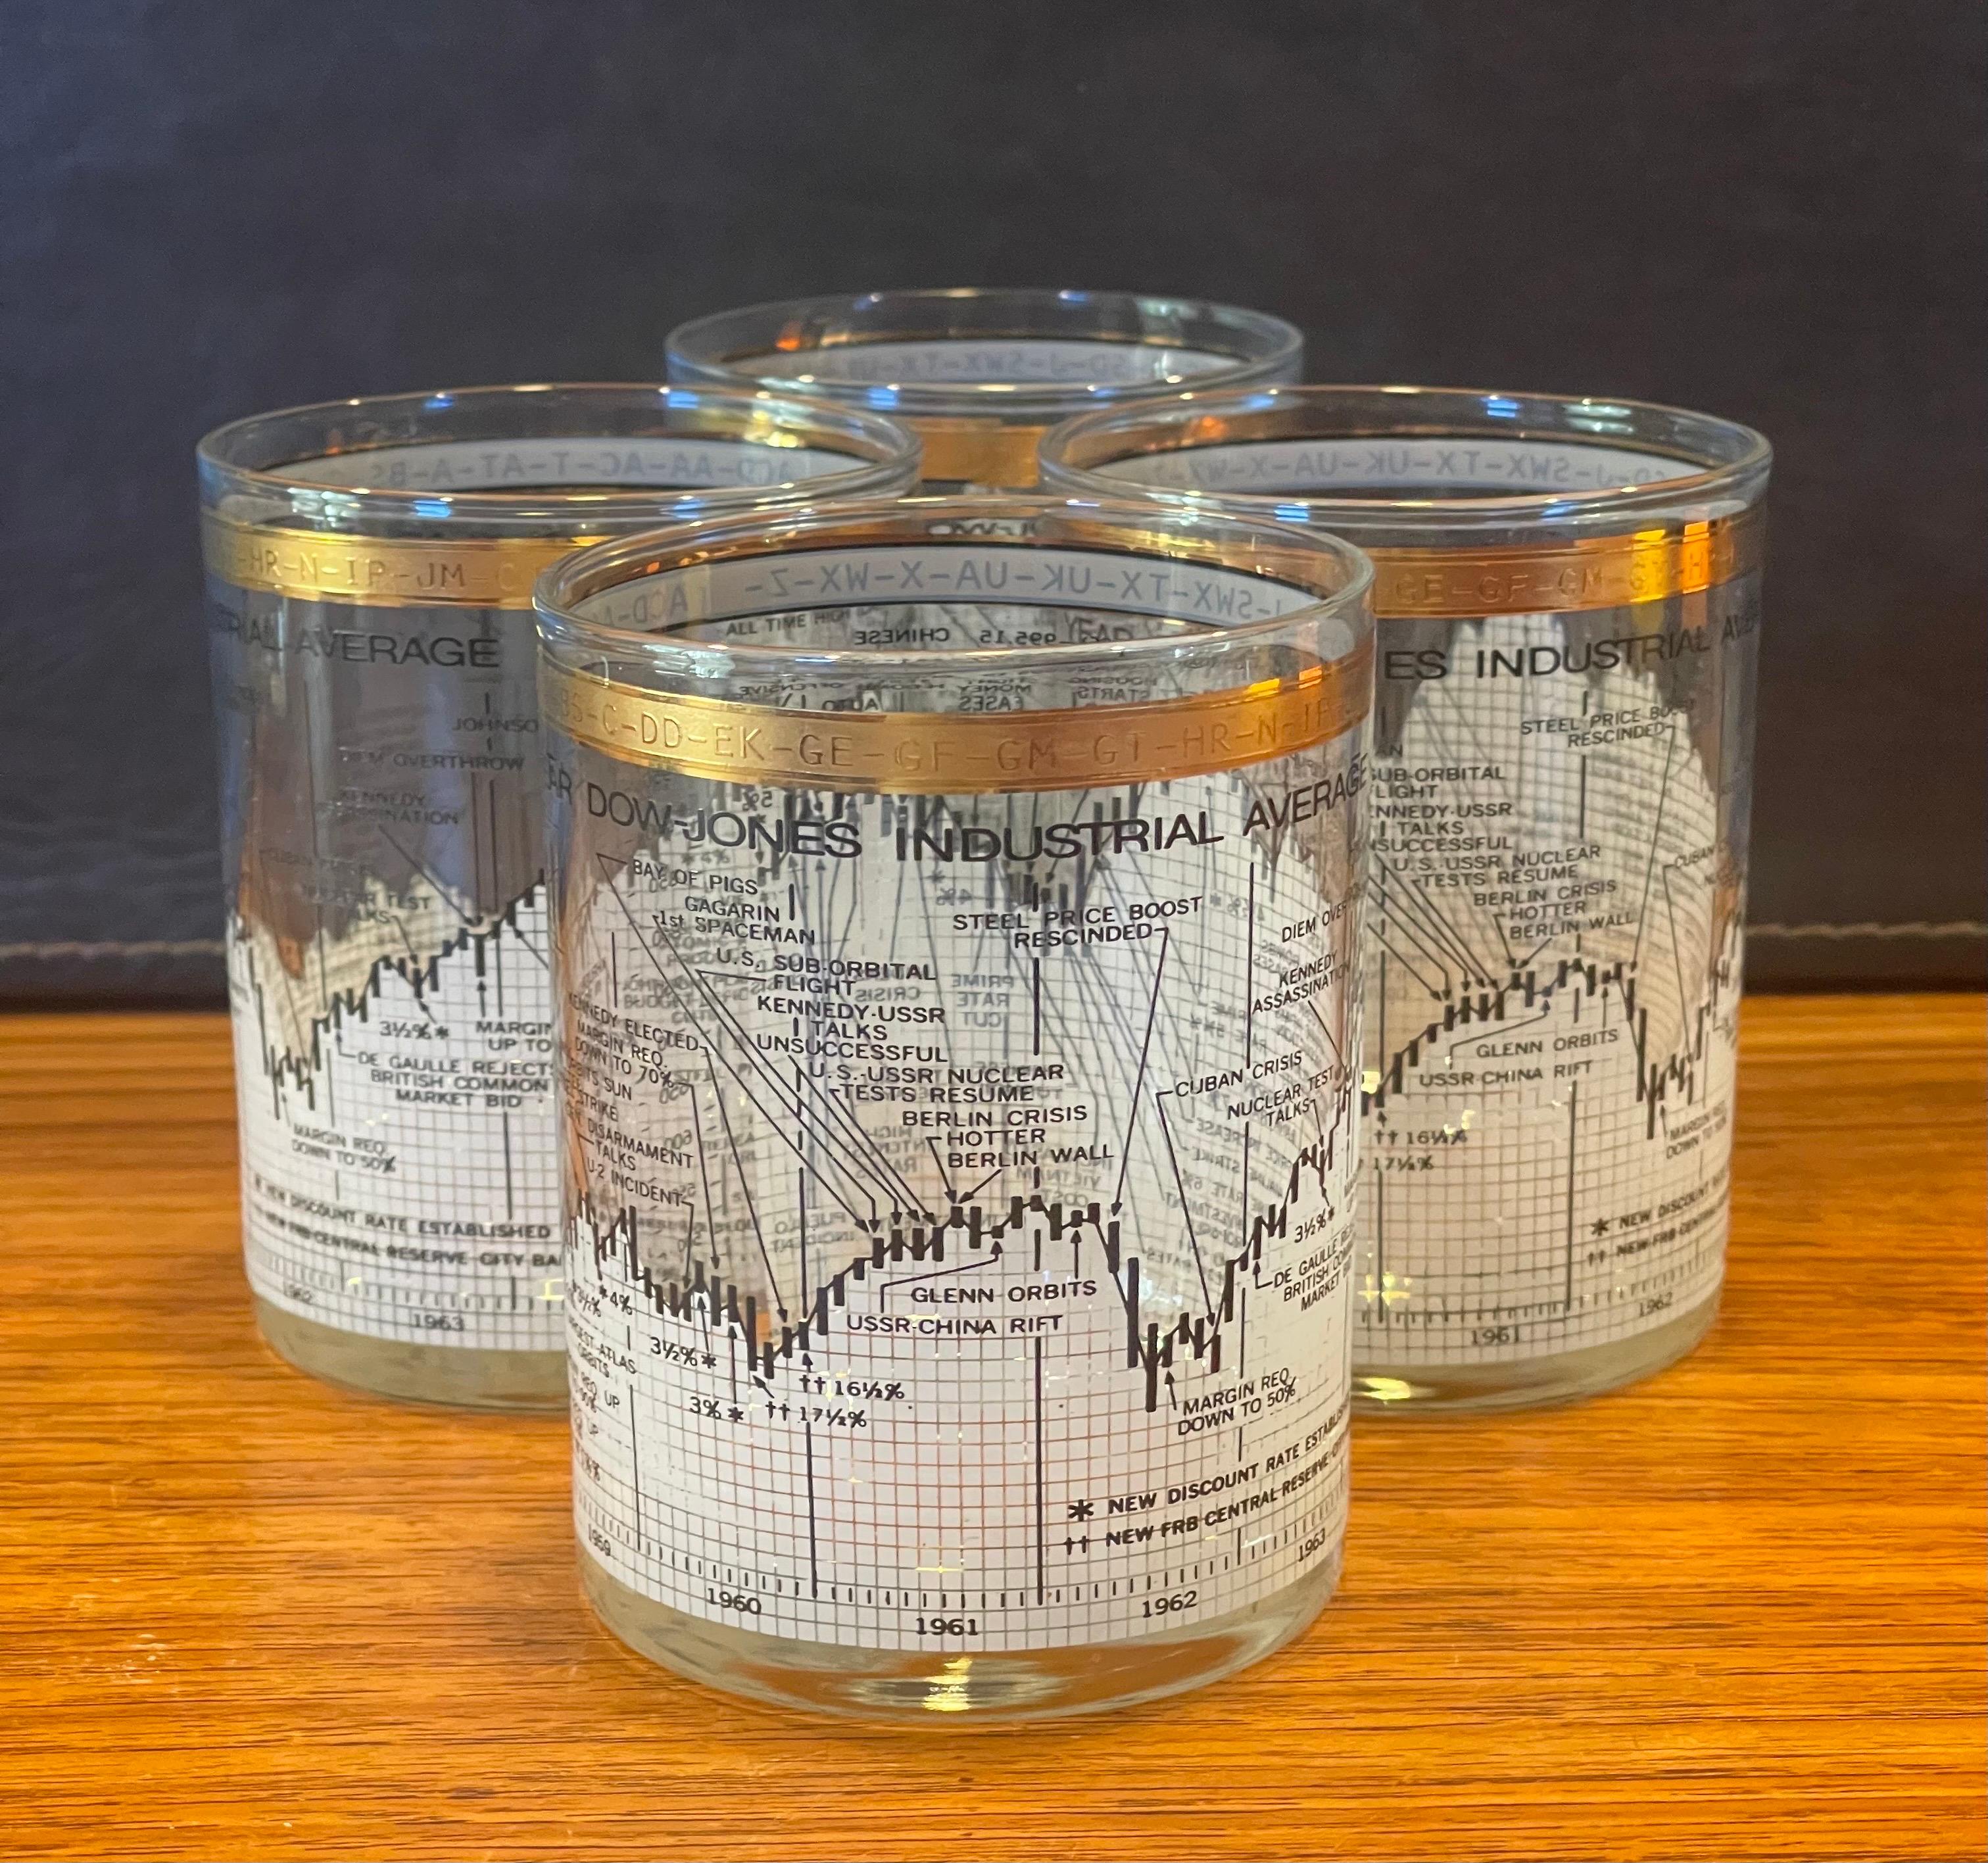 Great set of four double old fashioned glasses tracking the Dow Jones Industrial Average (DJIA) from 1958 to 1968 by Cera, circa 1970s.  Each glass is the same and captures 10 years of current events and their impact on the stock market. The glasses